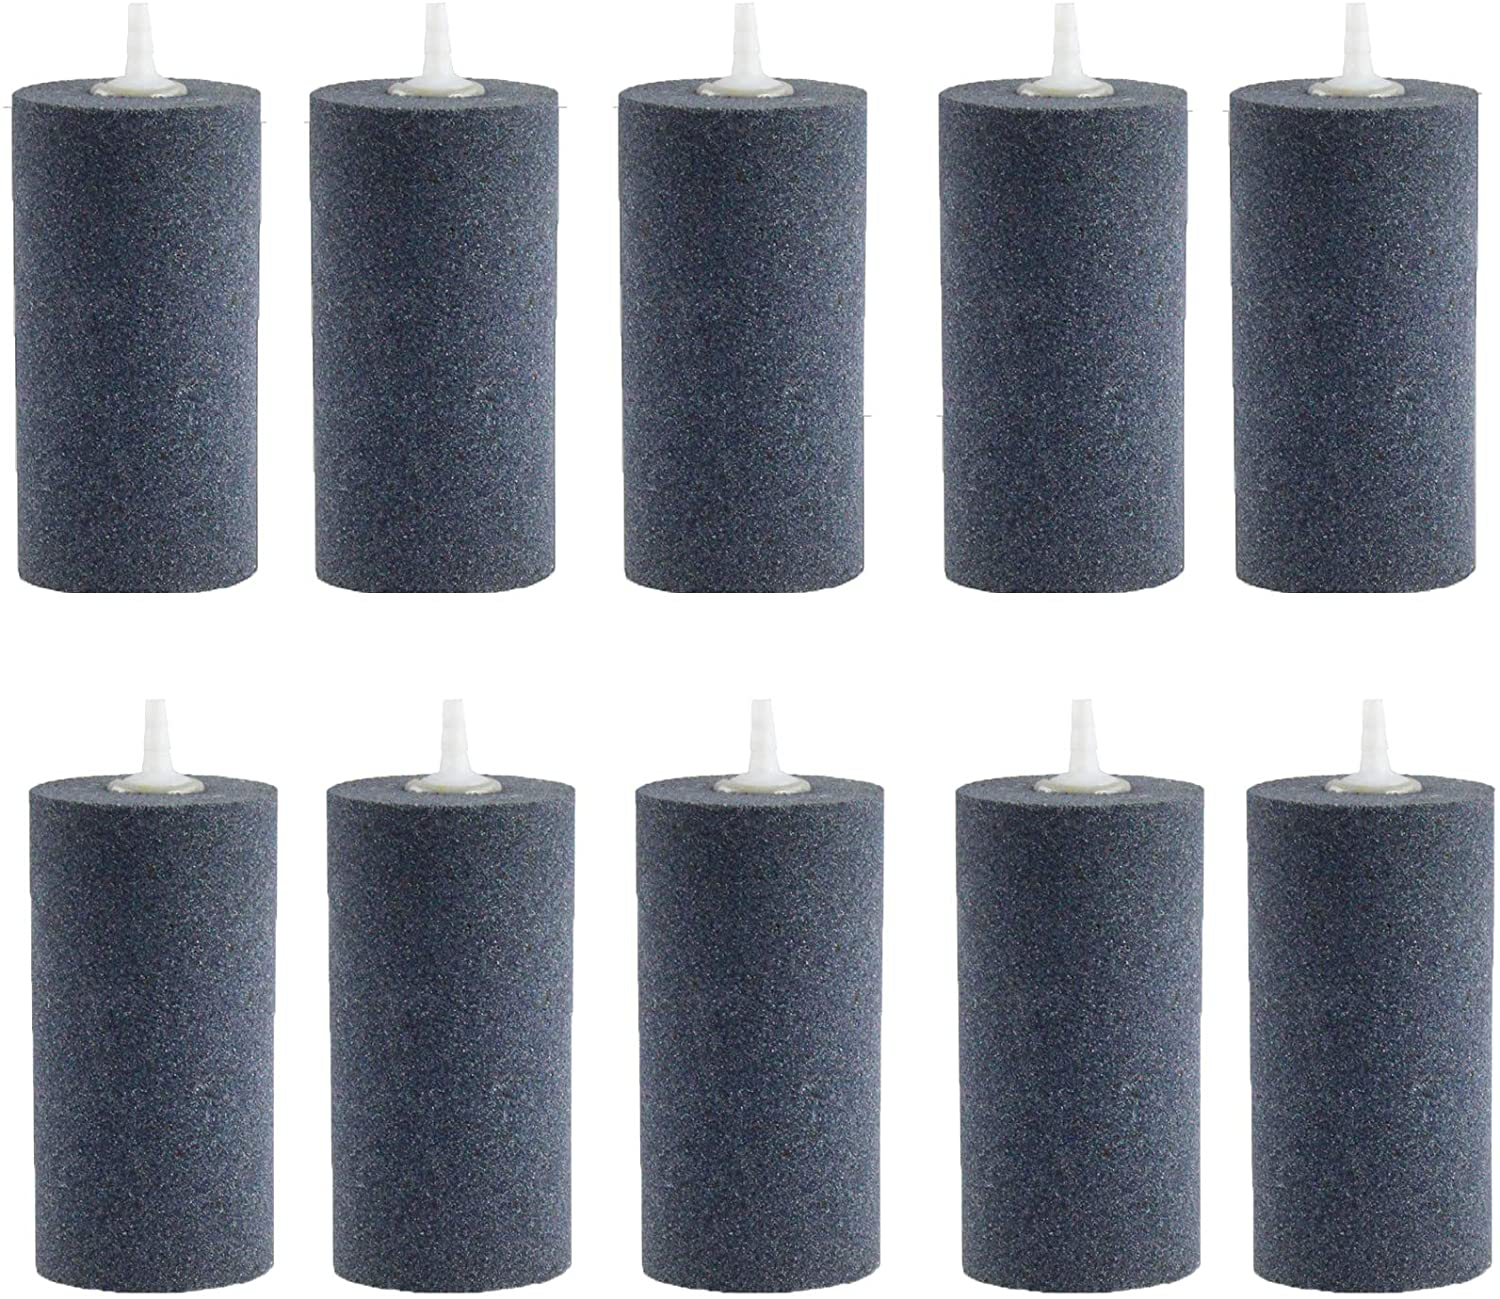 AQUANEAT Air Stone, 4 X 2 Inch Large Air Stone Cylinder, Aerator Bubble Diffuser, Air Pump Accessories for Hydroponic Growing System, Pond Circulation, Aquarium Fish Tank (10 Pack) Animals & Pet Supplies > Pet Supplies > Fish Supplies > Aquarium Air Stones & Diffusers AQUANEAT   